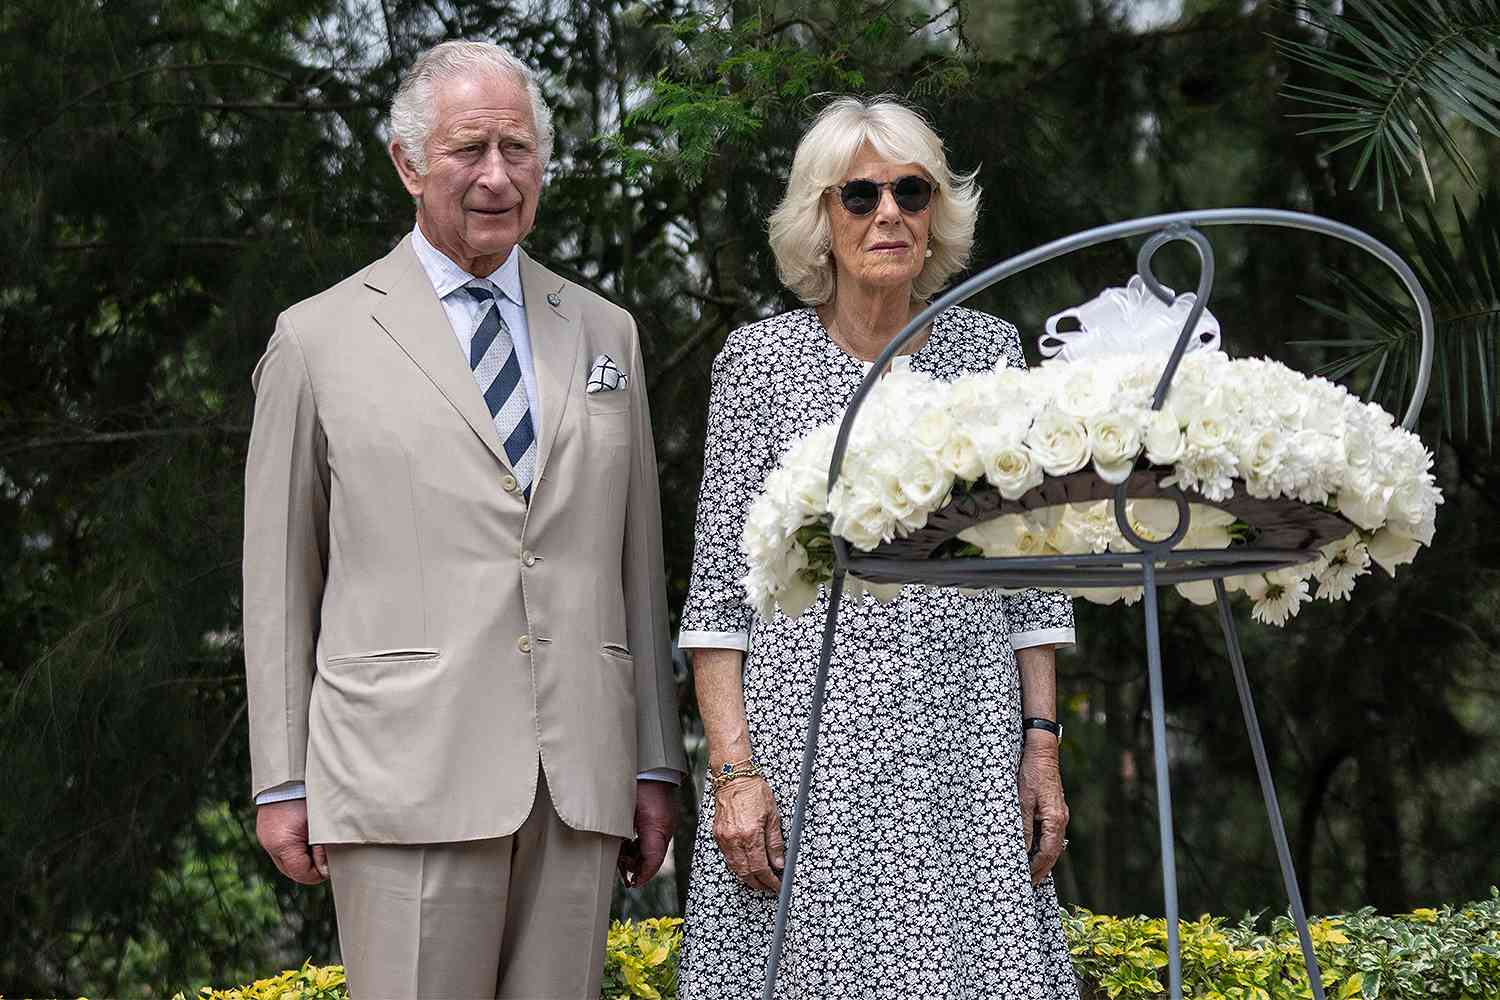 Britain's Prince Charles, Prince of Wales, and Britain's Camilla, Duchess of Cornwall pause in front of a flower wreath at the Kigali Genocide Memorial, Kigali, Rwanda on June 22, 2022 during a visit. - Britain's Prince Charles will take part in the 26th Commonwealth Heads of Government Meeting held in Kigali, Rwanda from the 20 june until the 25 June 2022.